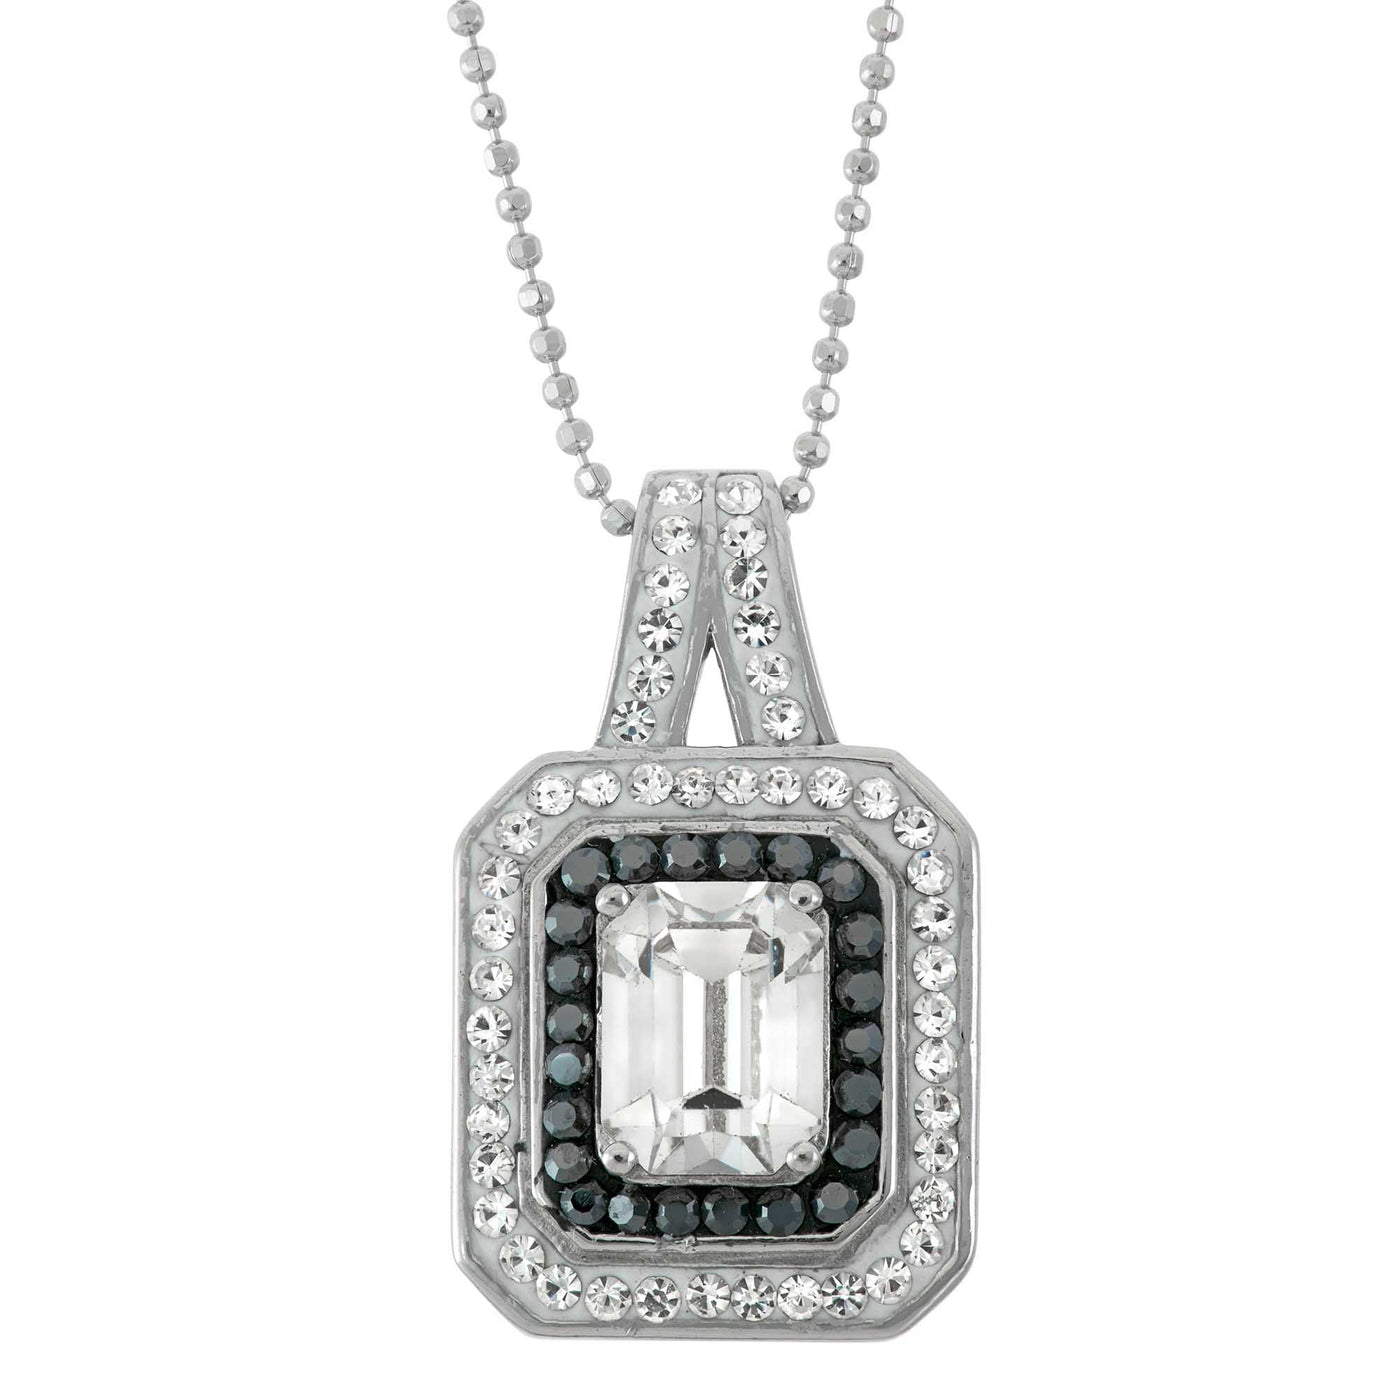 Sterling Silver Square Pendant Necklace With Jet Hematite And Clear Crystal Elements